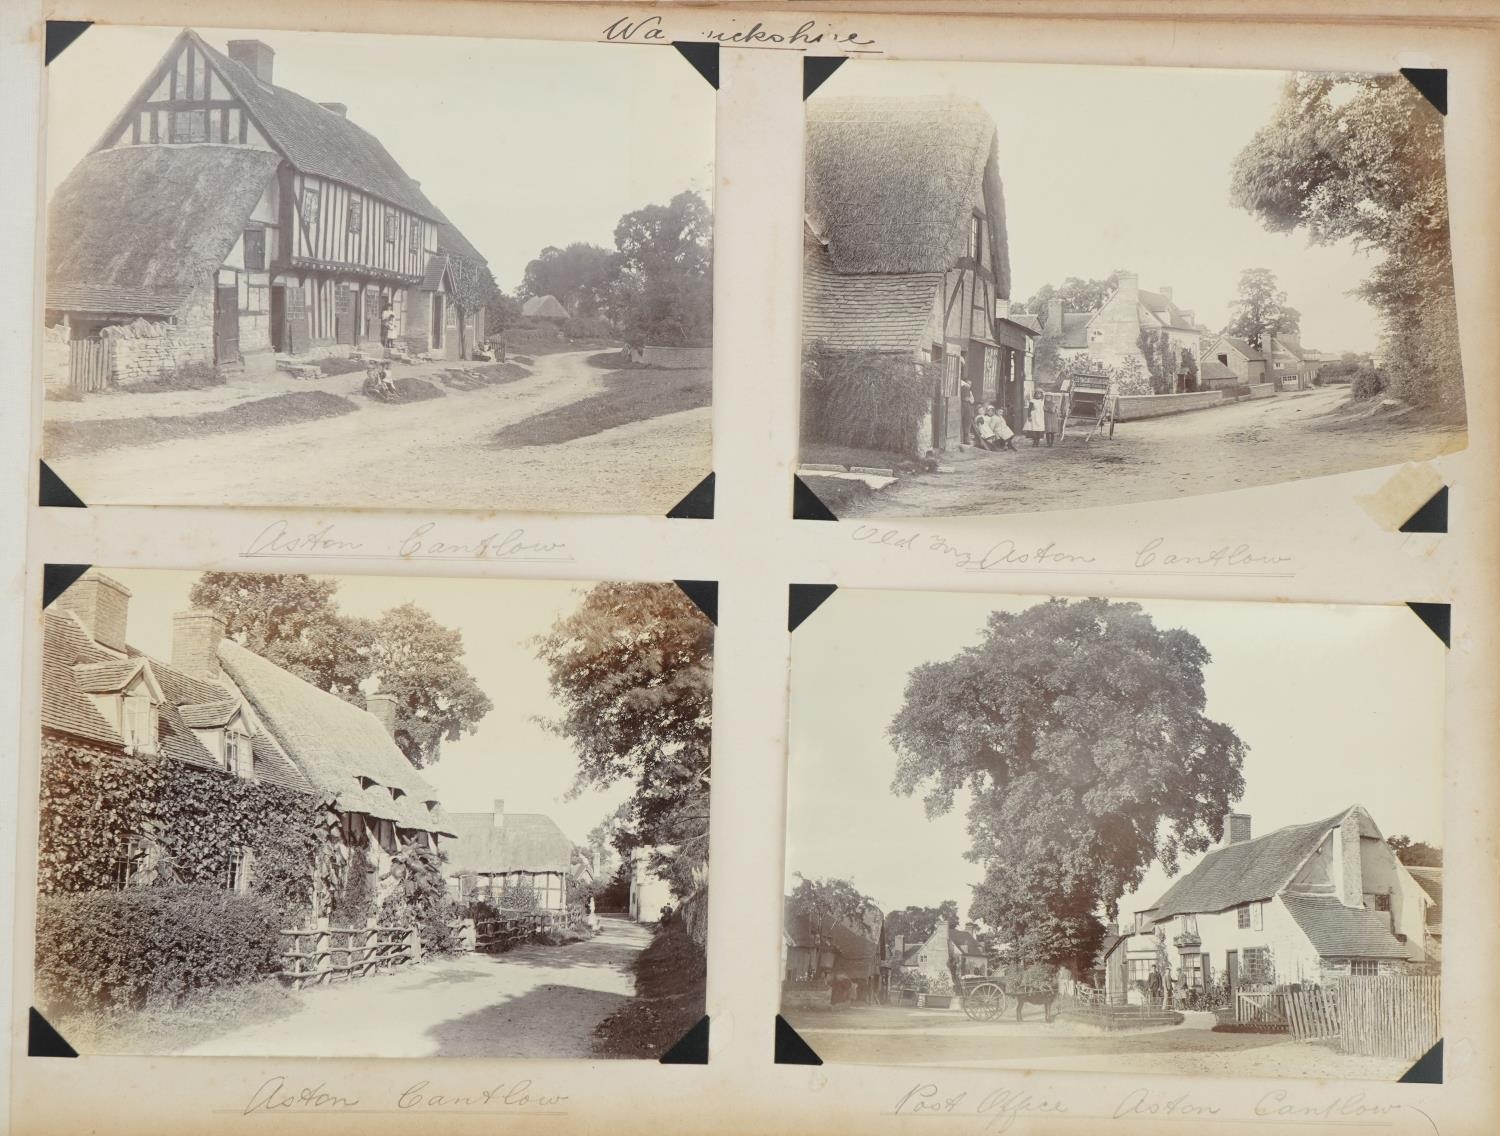 Early 20th century black and white photographs arranged in an album including Staffordshire, - Image 16 of 40